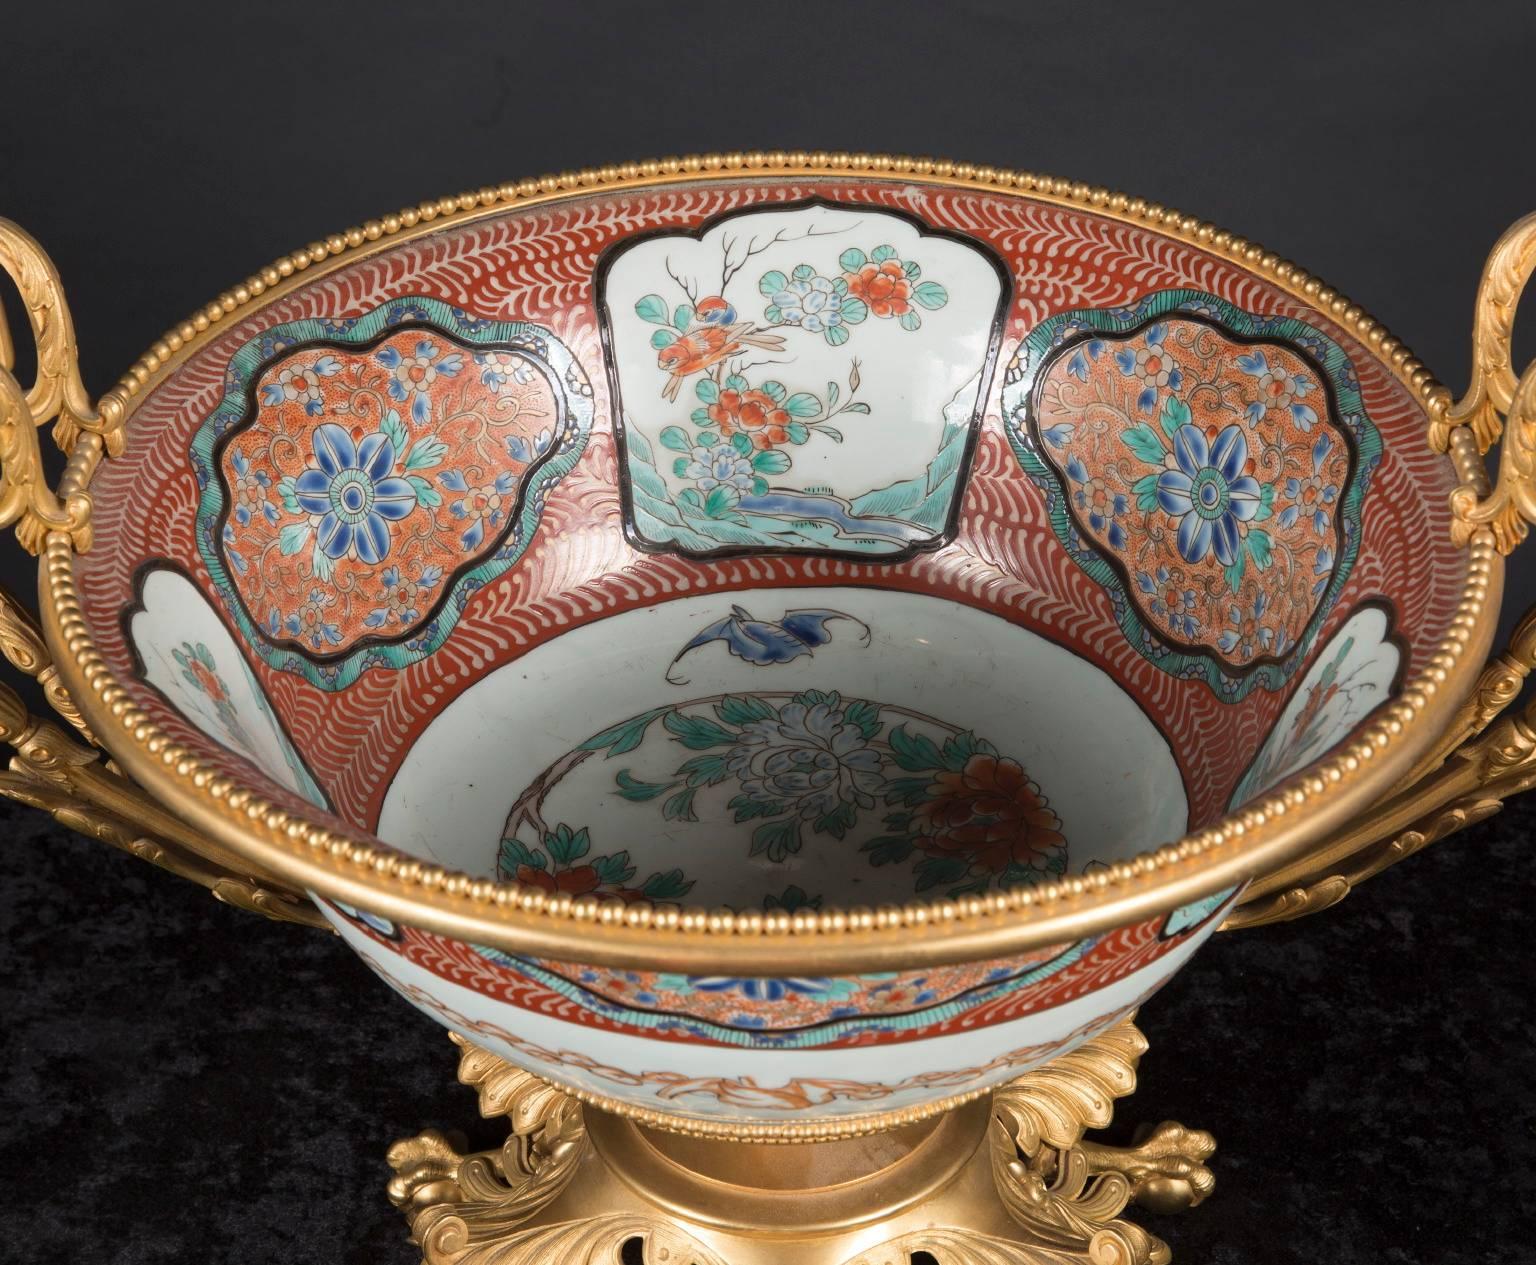 19th Century Japanese Porcelain with French Bronze D'ore Mounts Centerpiece